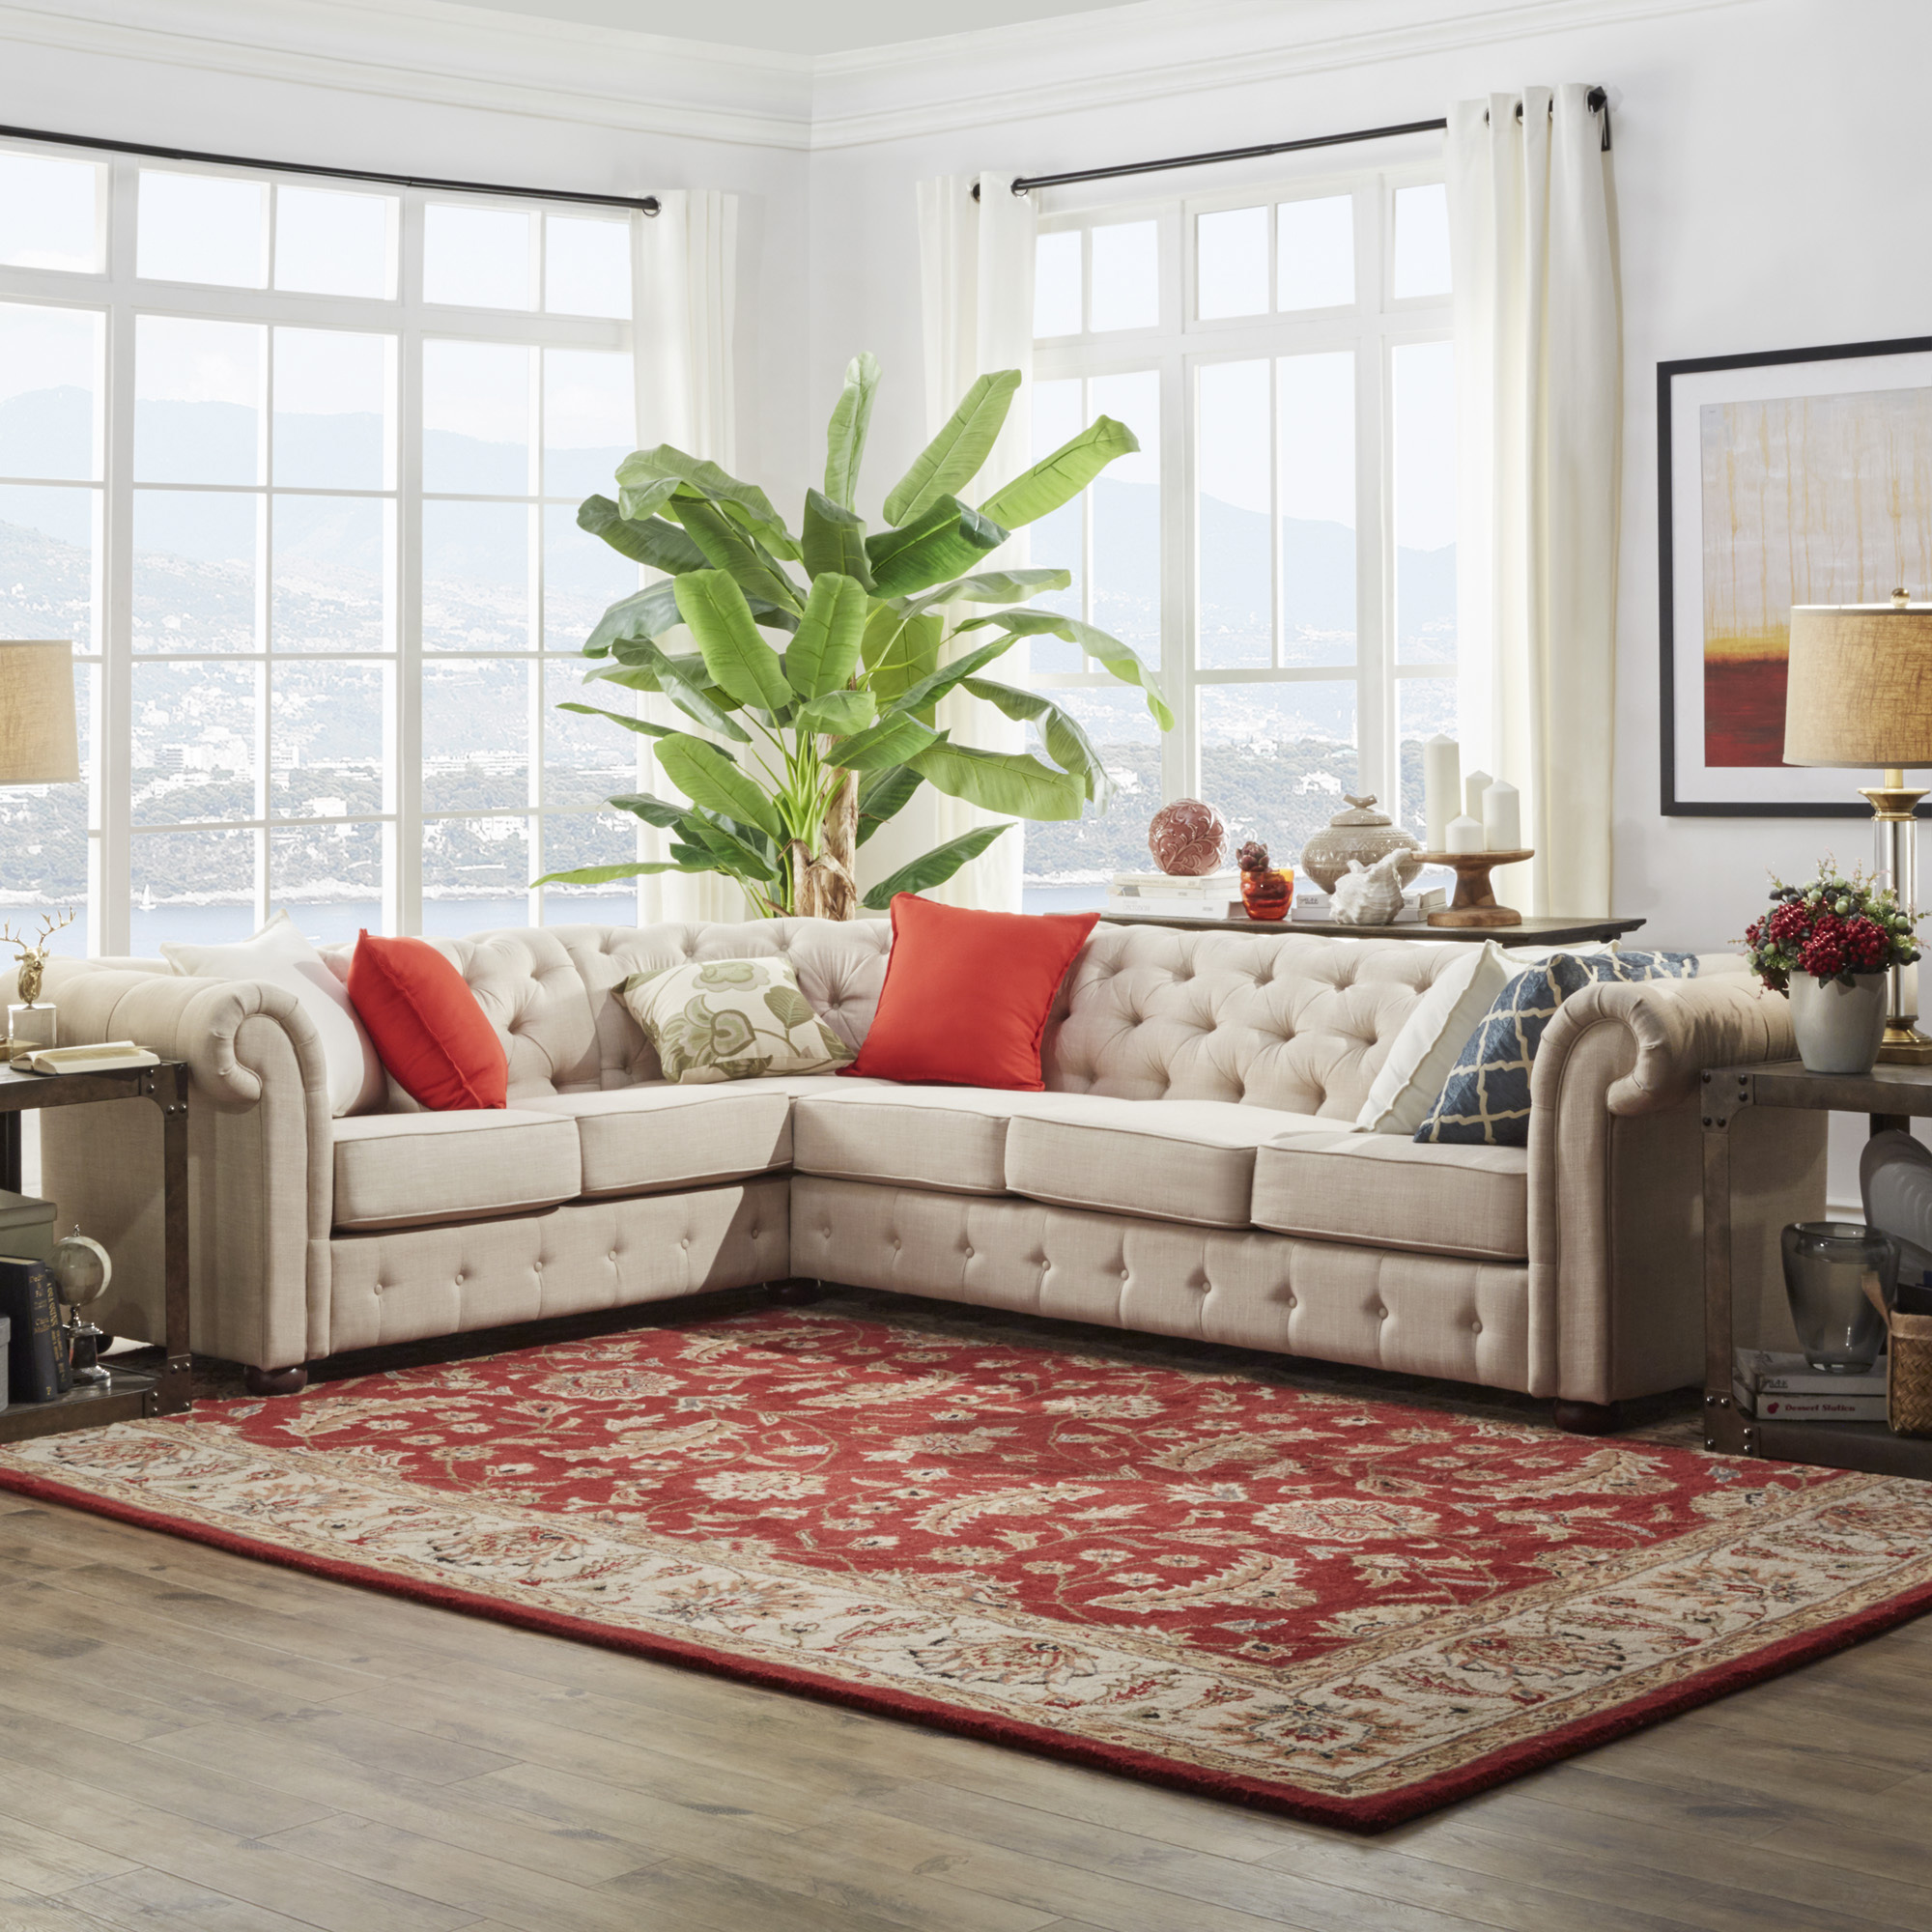 6-Seat L-Shaped Chesterfield Sectional Sofa